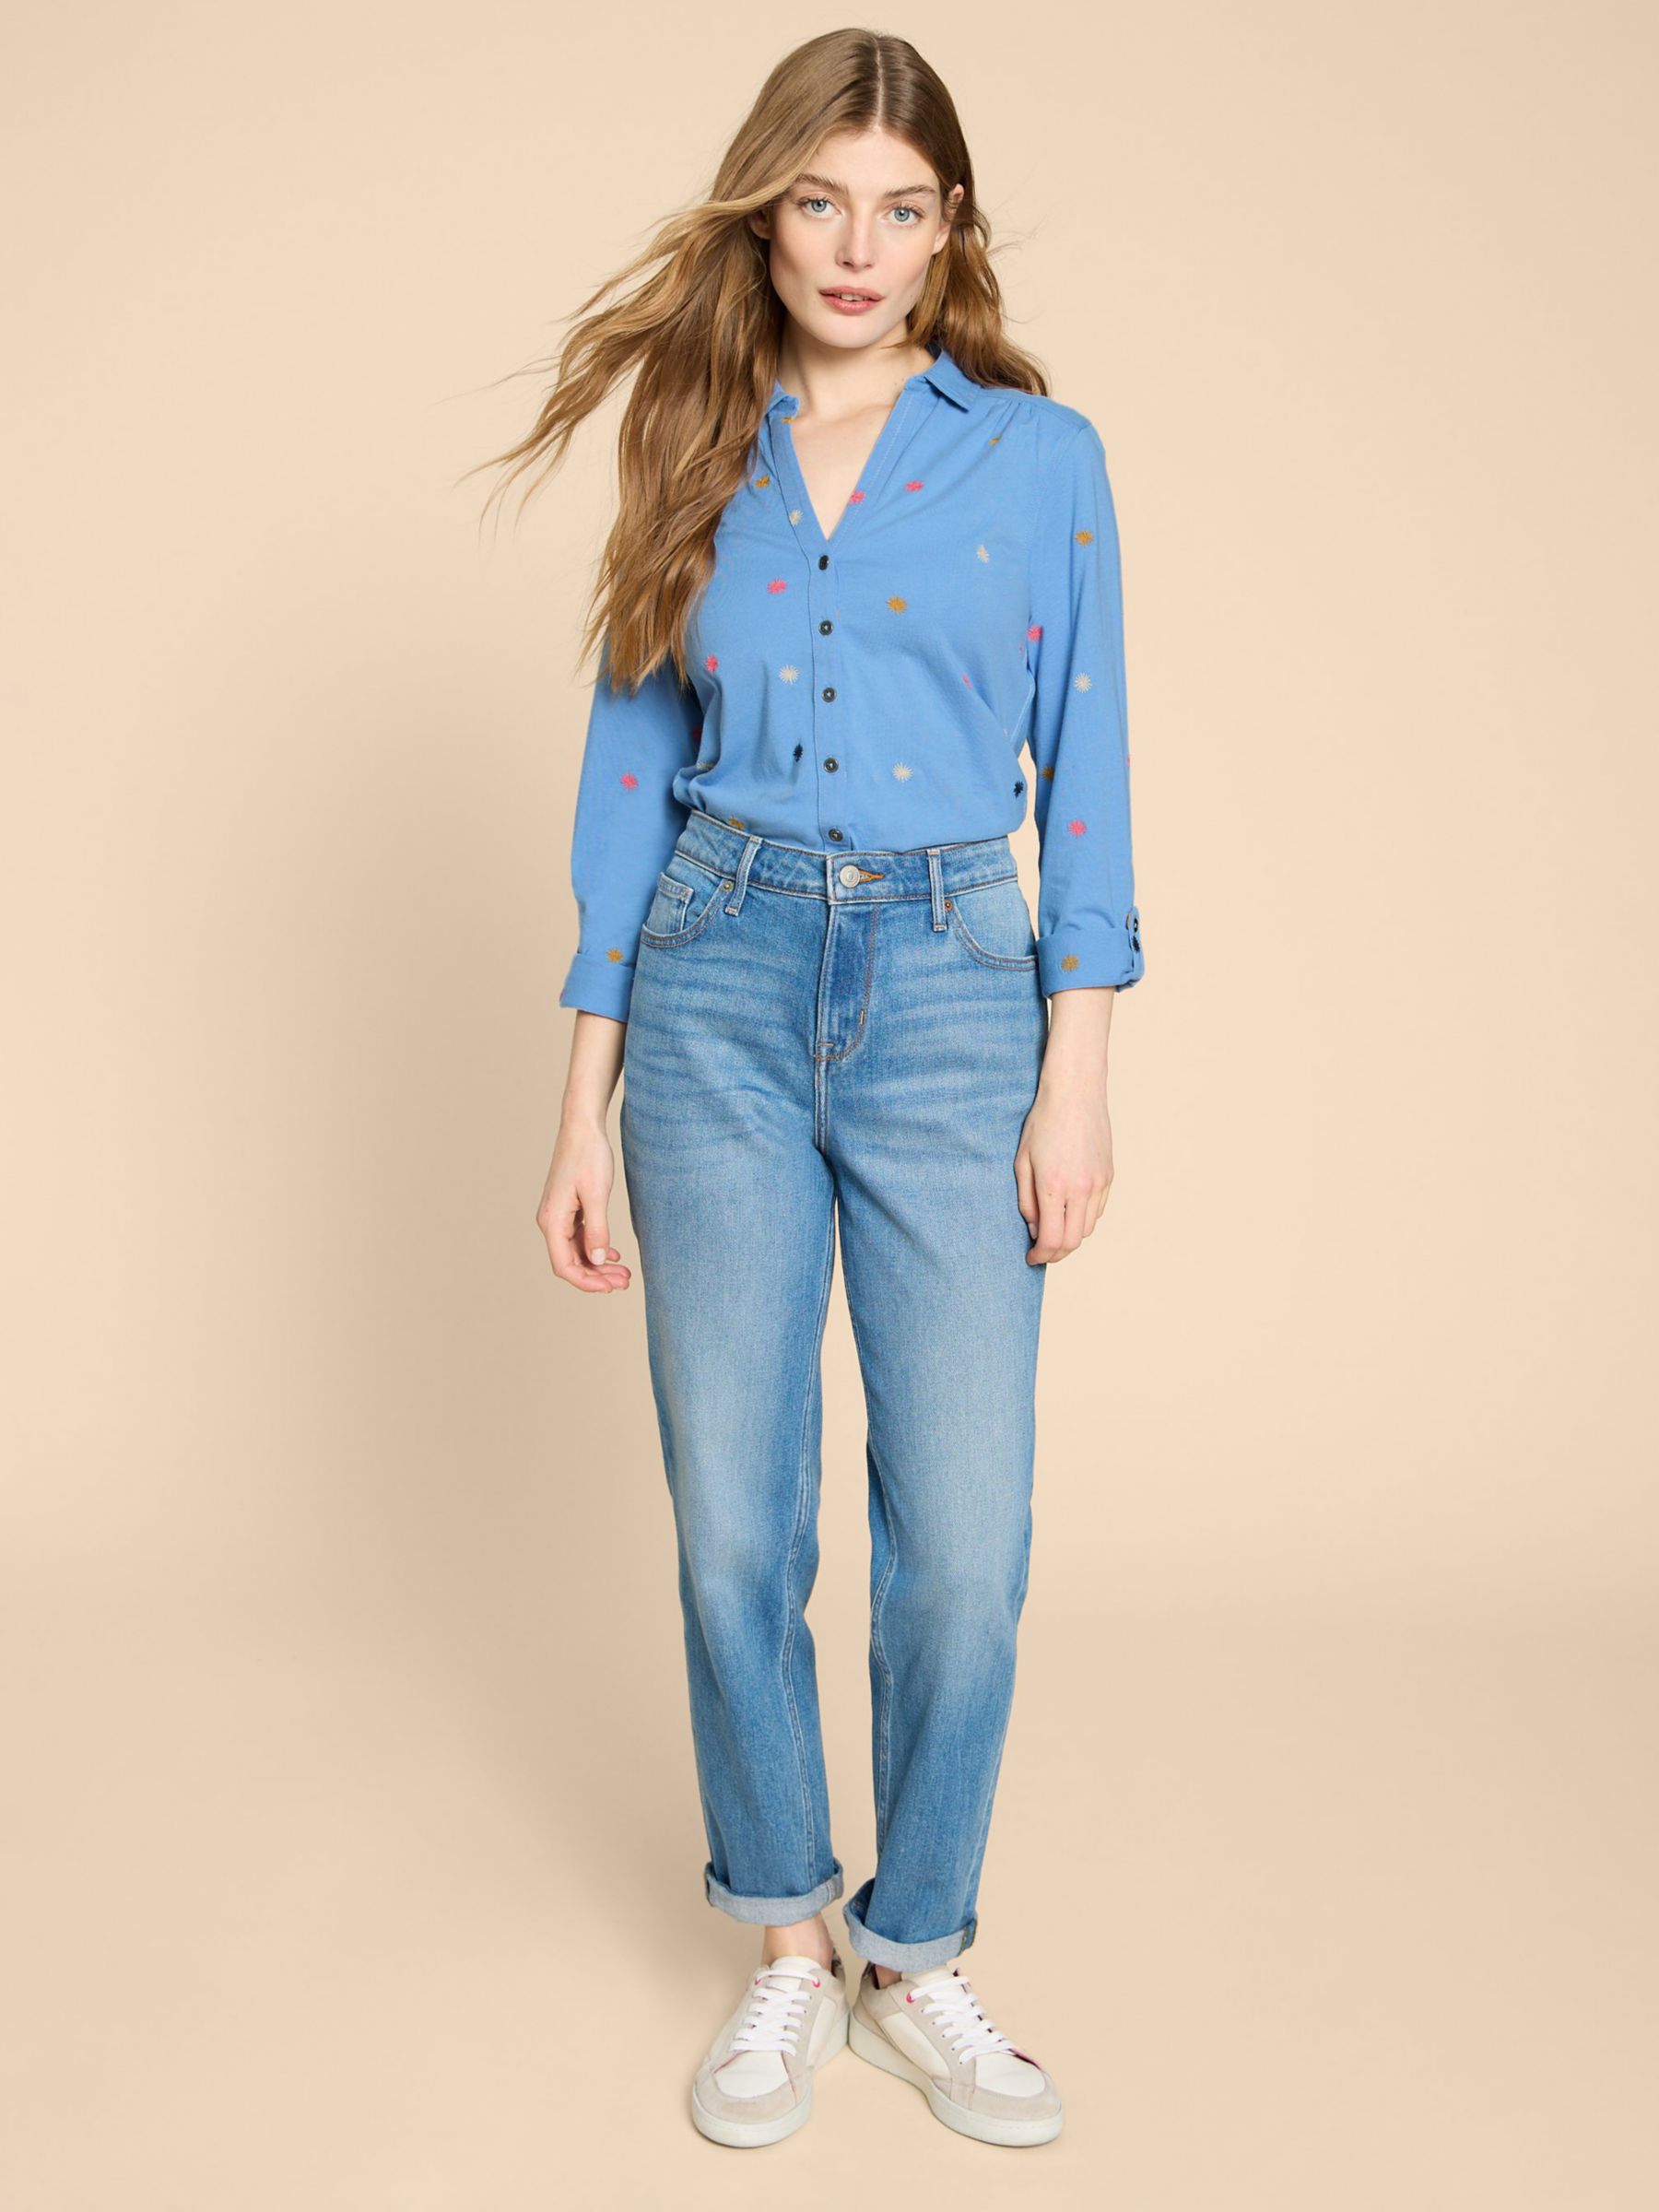 Buy White Stuff Annie Embroidered Jersey Shirt, Blue/Multi Online at johnlewis.com